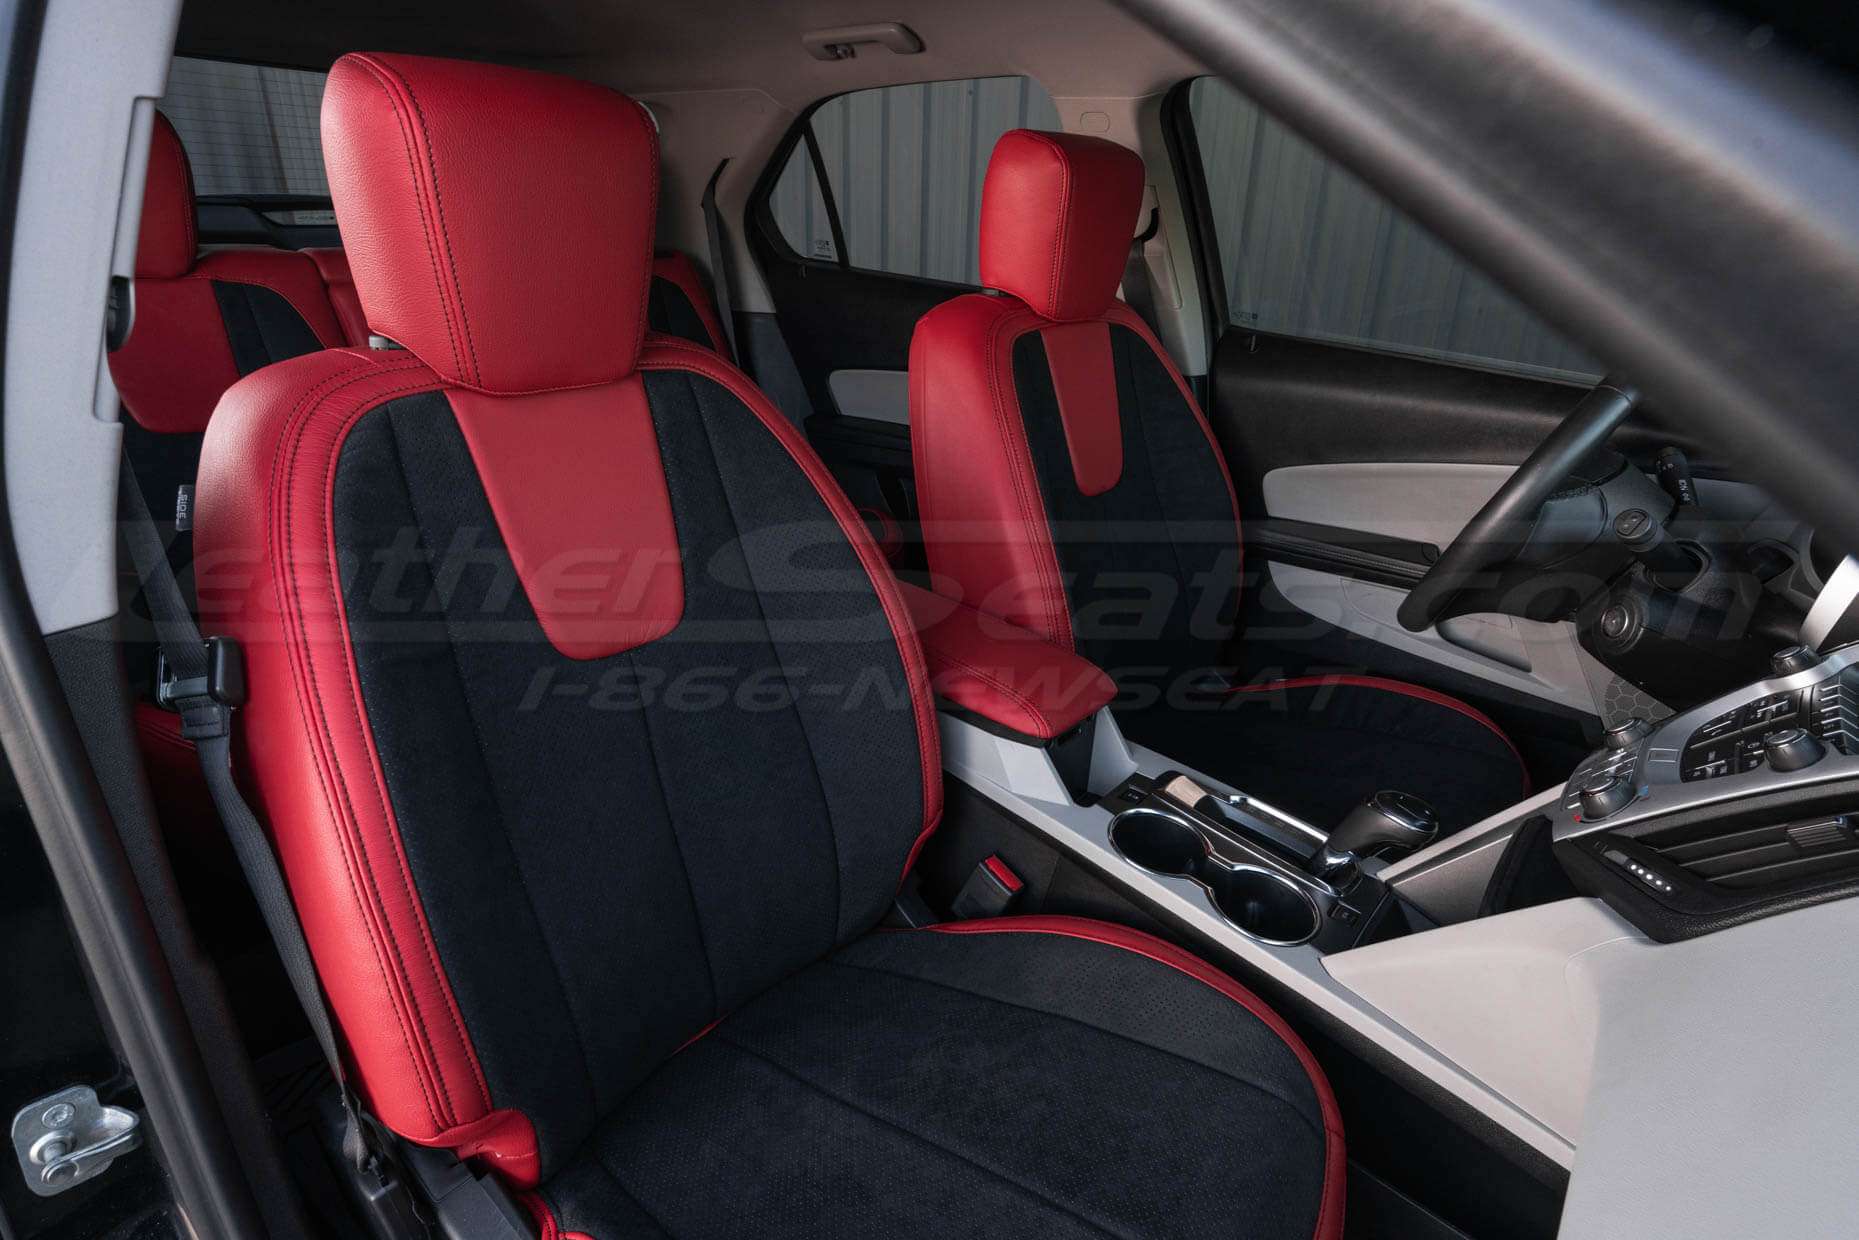 Chevrolet Equinox Installed Leather Seats - Red & Black - Upper section of front passenger seat